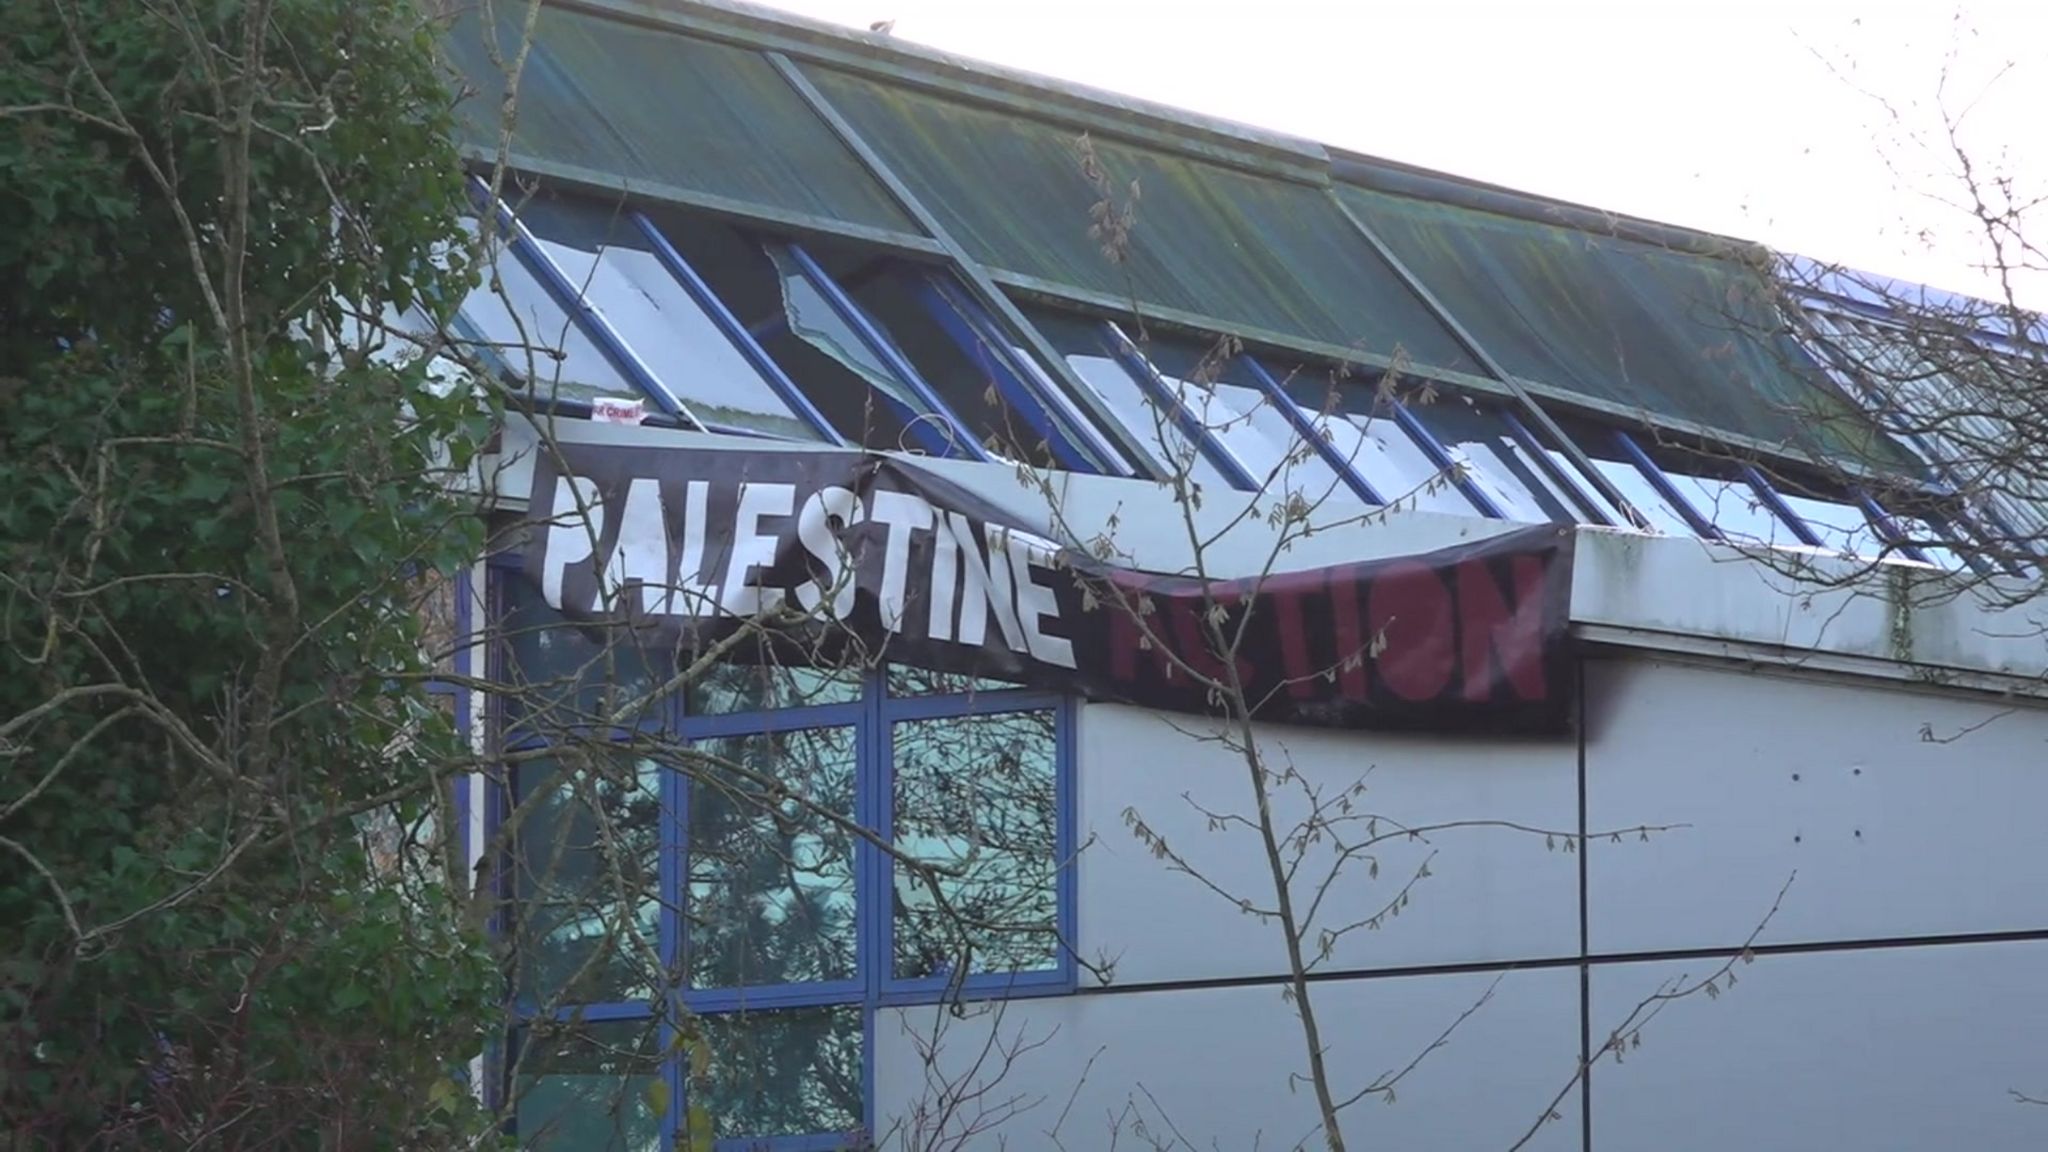 Protesters unfurled a Palestine banner at the factory during the protest